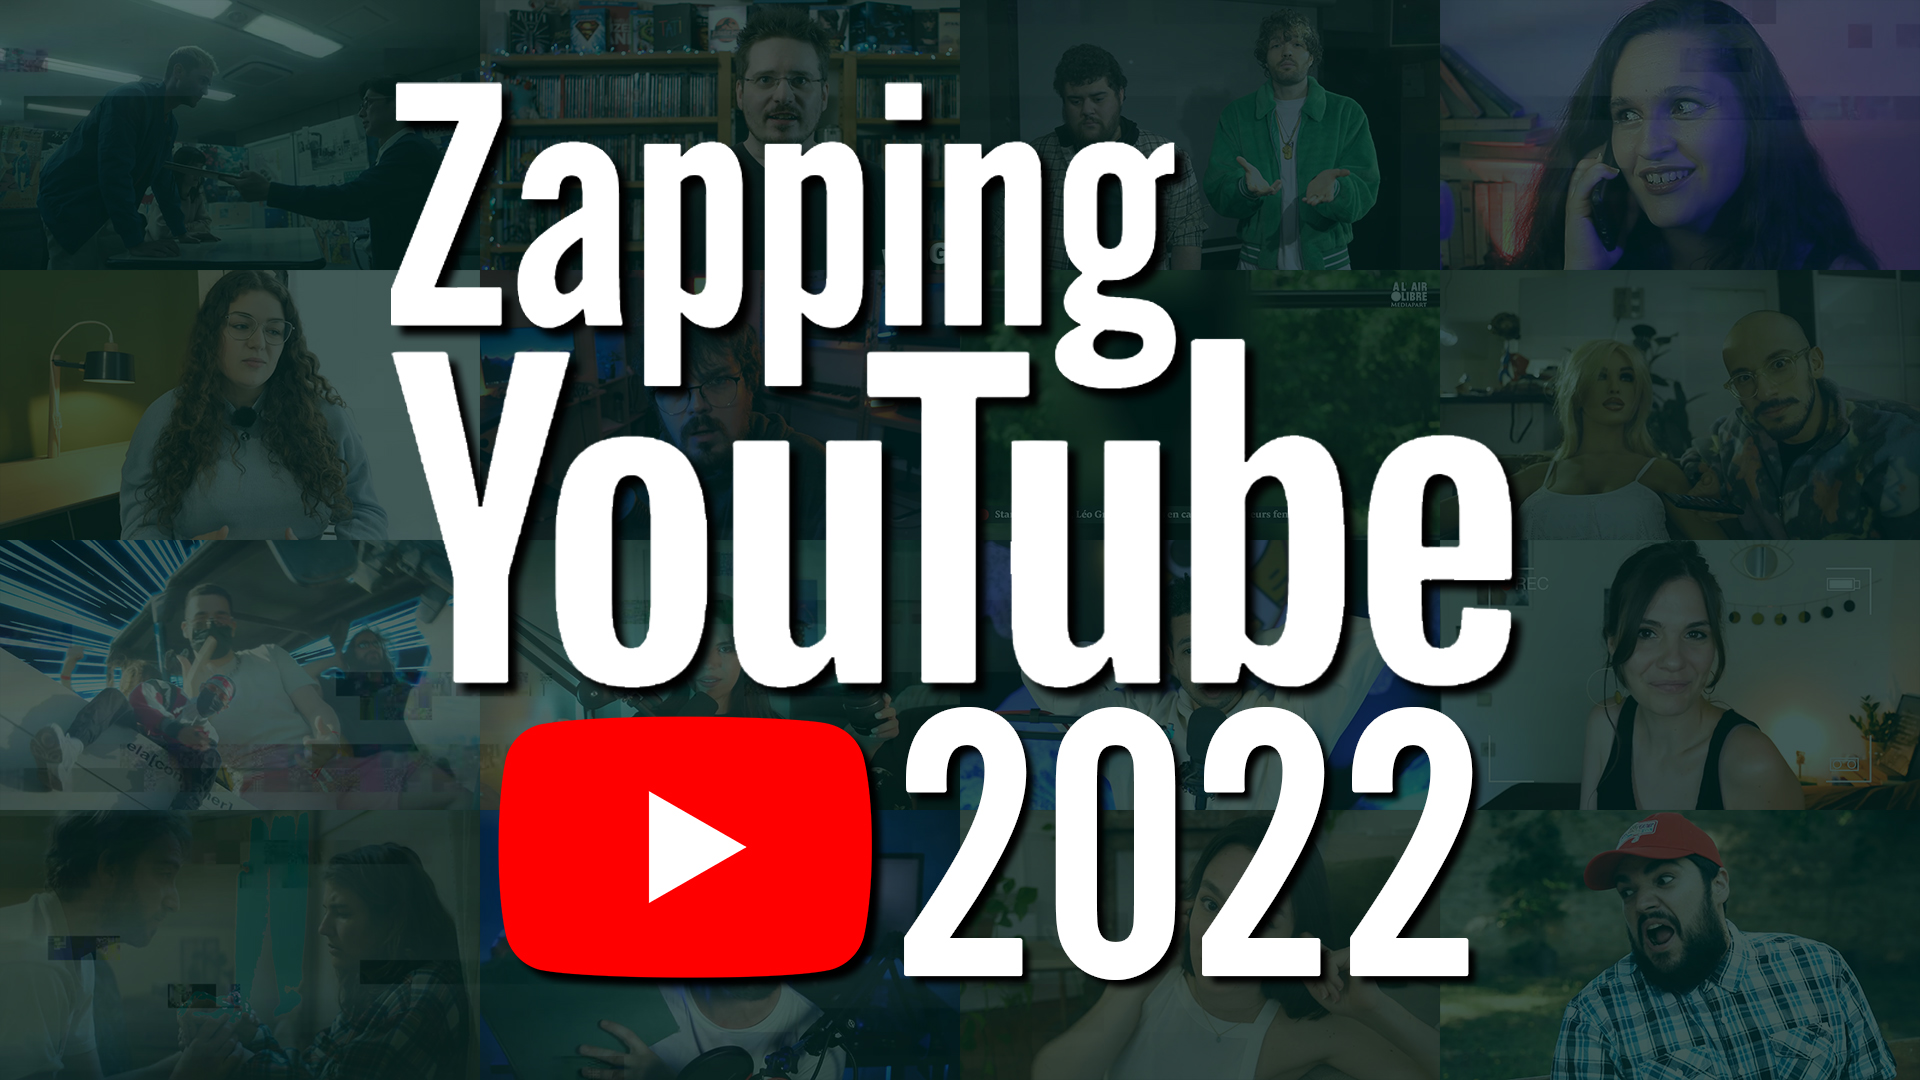 ZAPPING YOUTUBE 2022